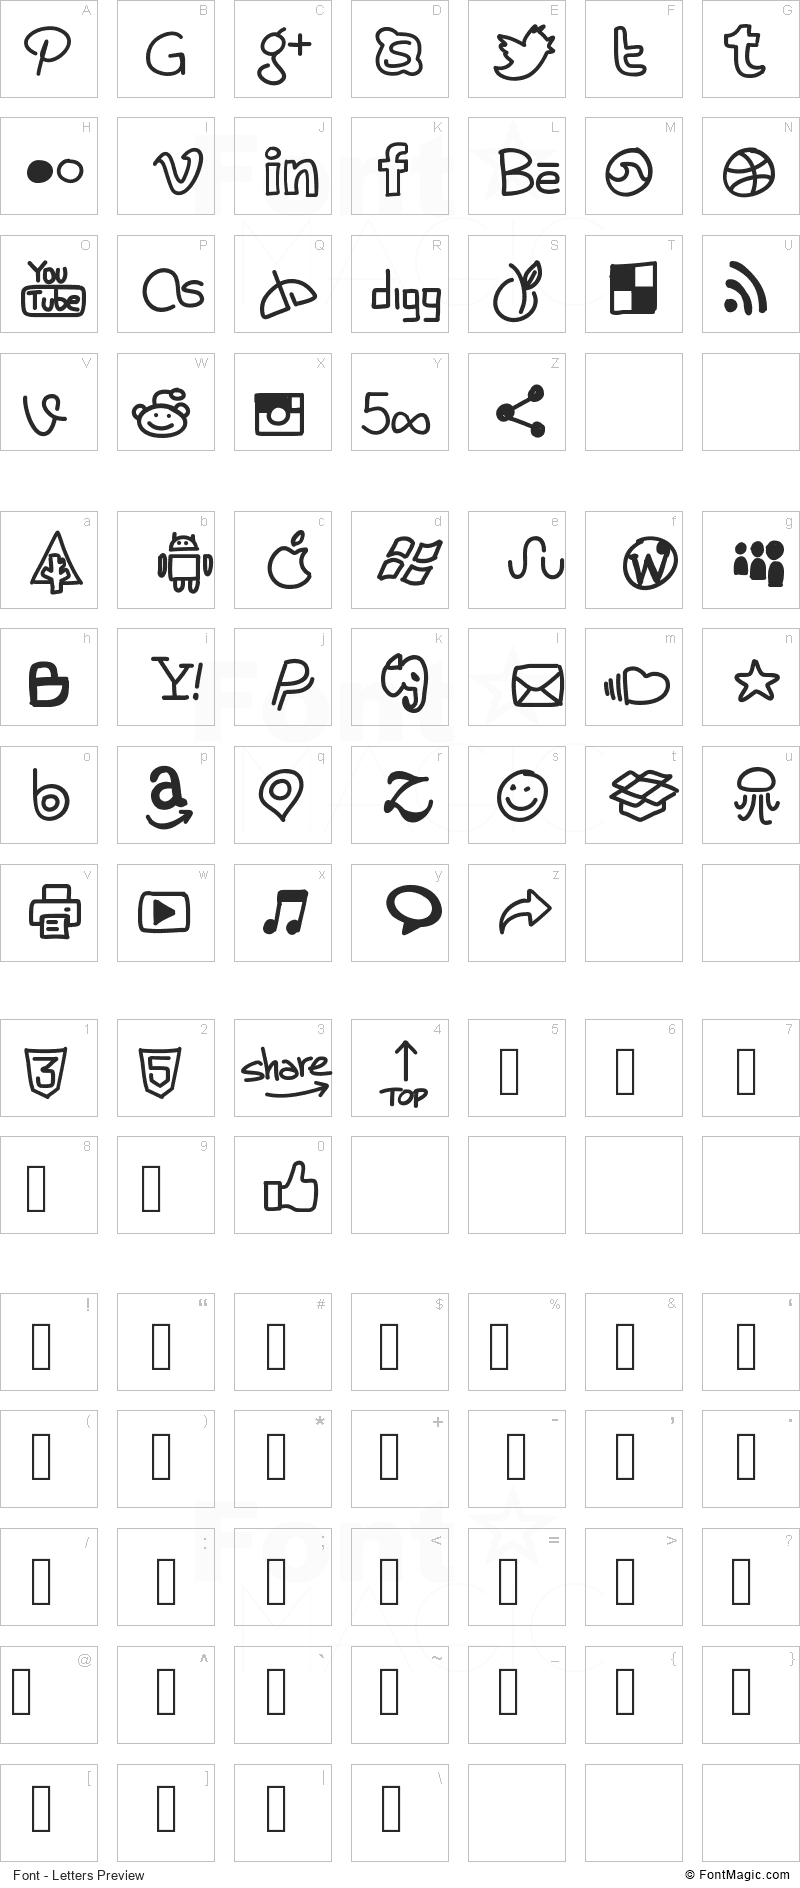 PW Handy Social Icons Font - All Latters Preview Chart